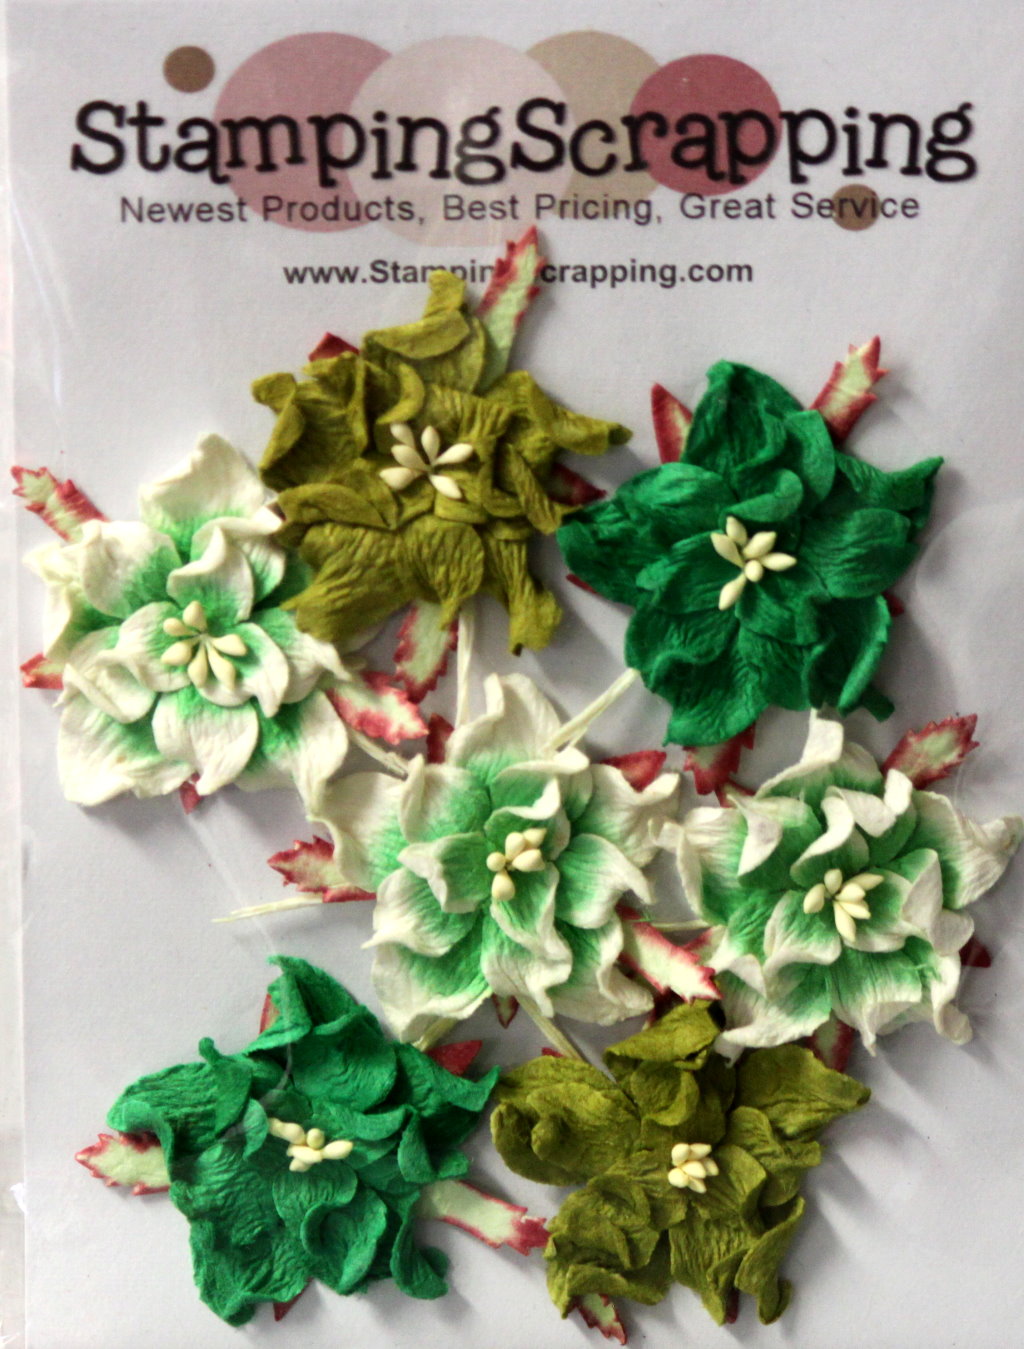 StampingScrapping Premium Gardenia Green Mulberry Paper Flowers